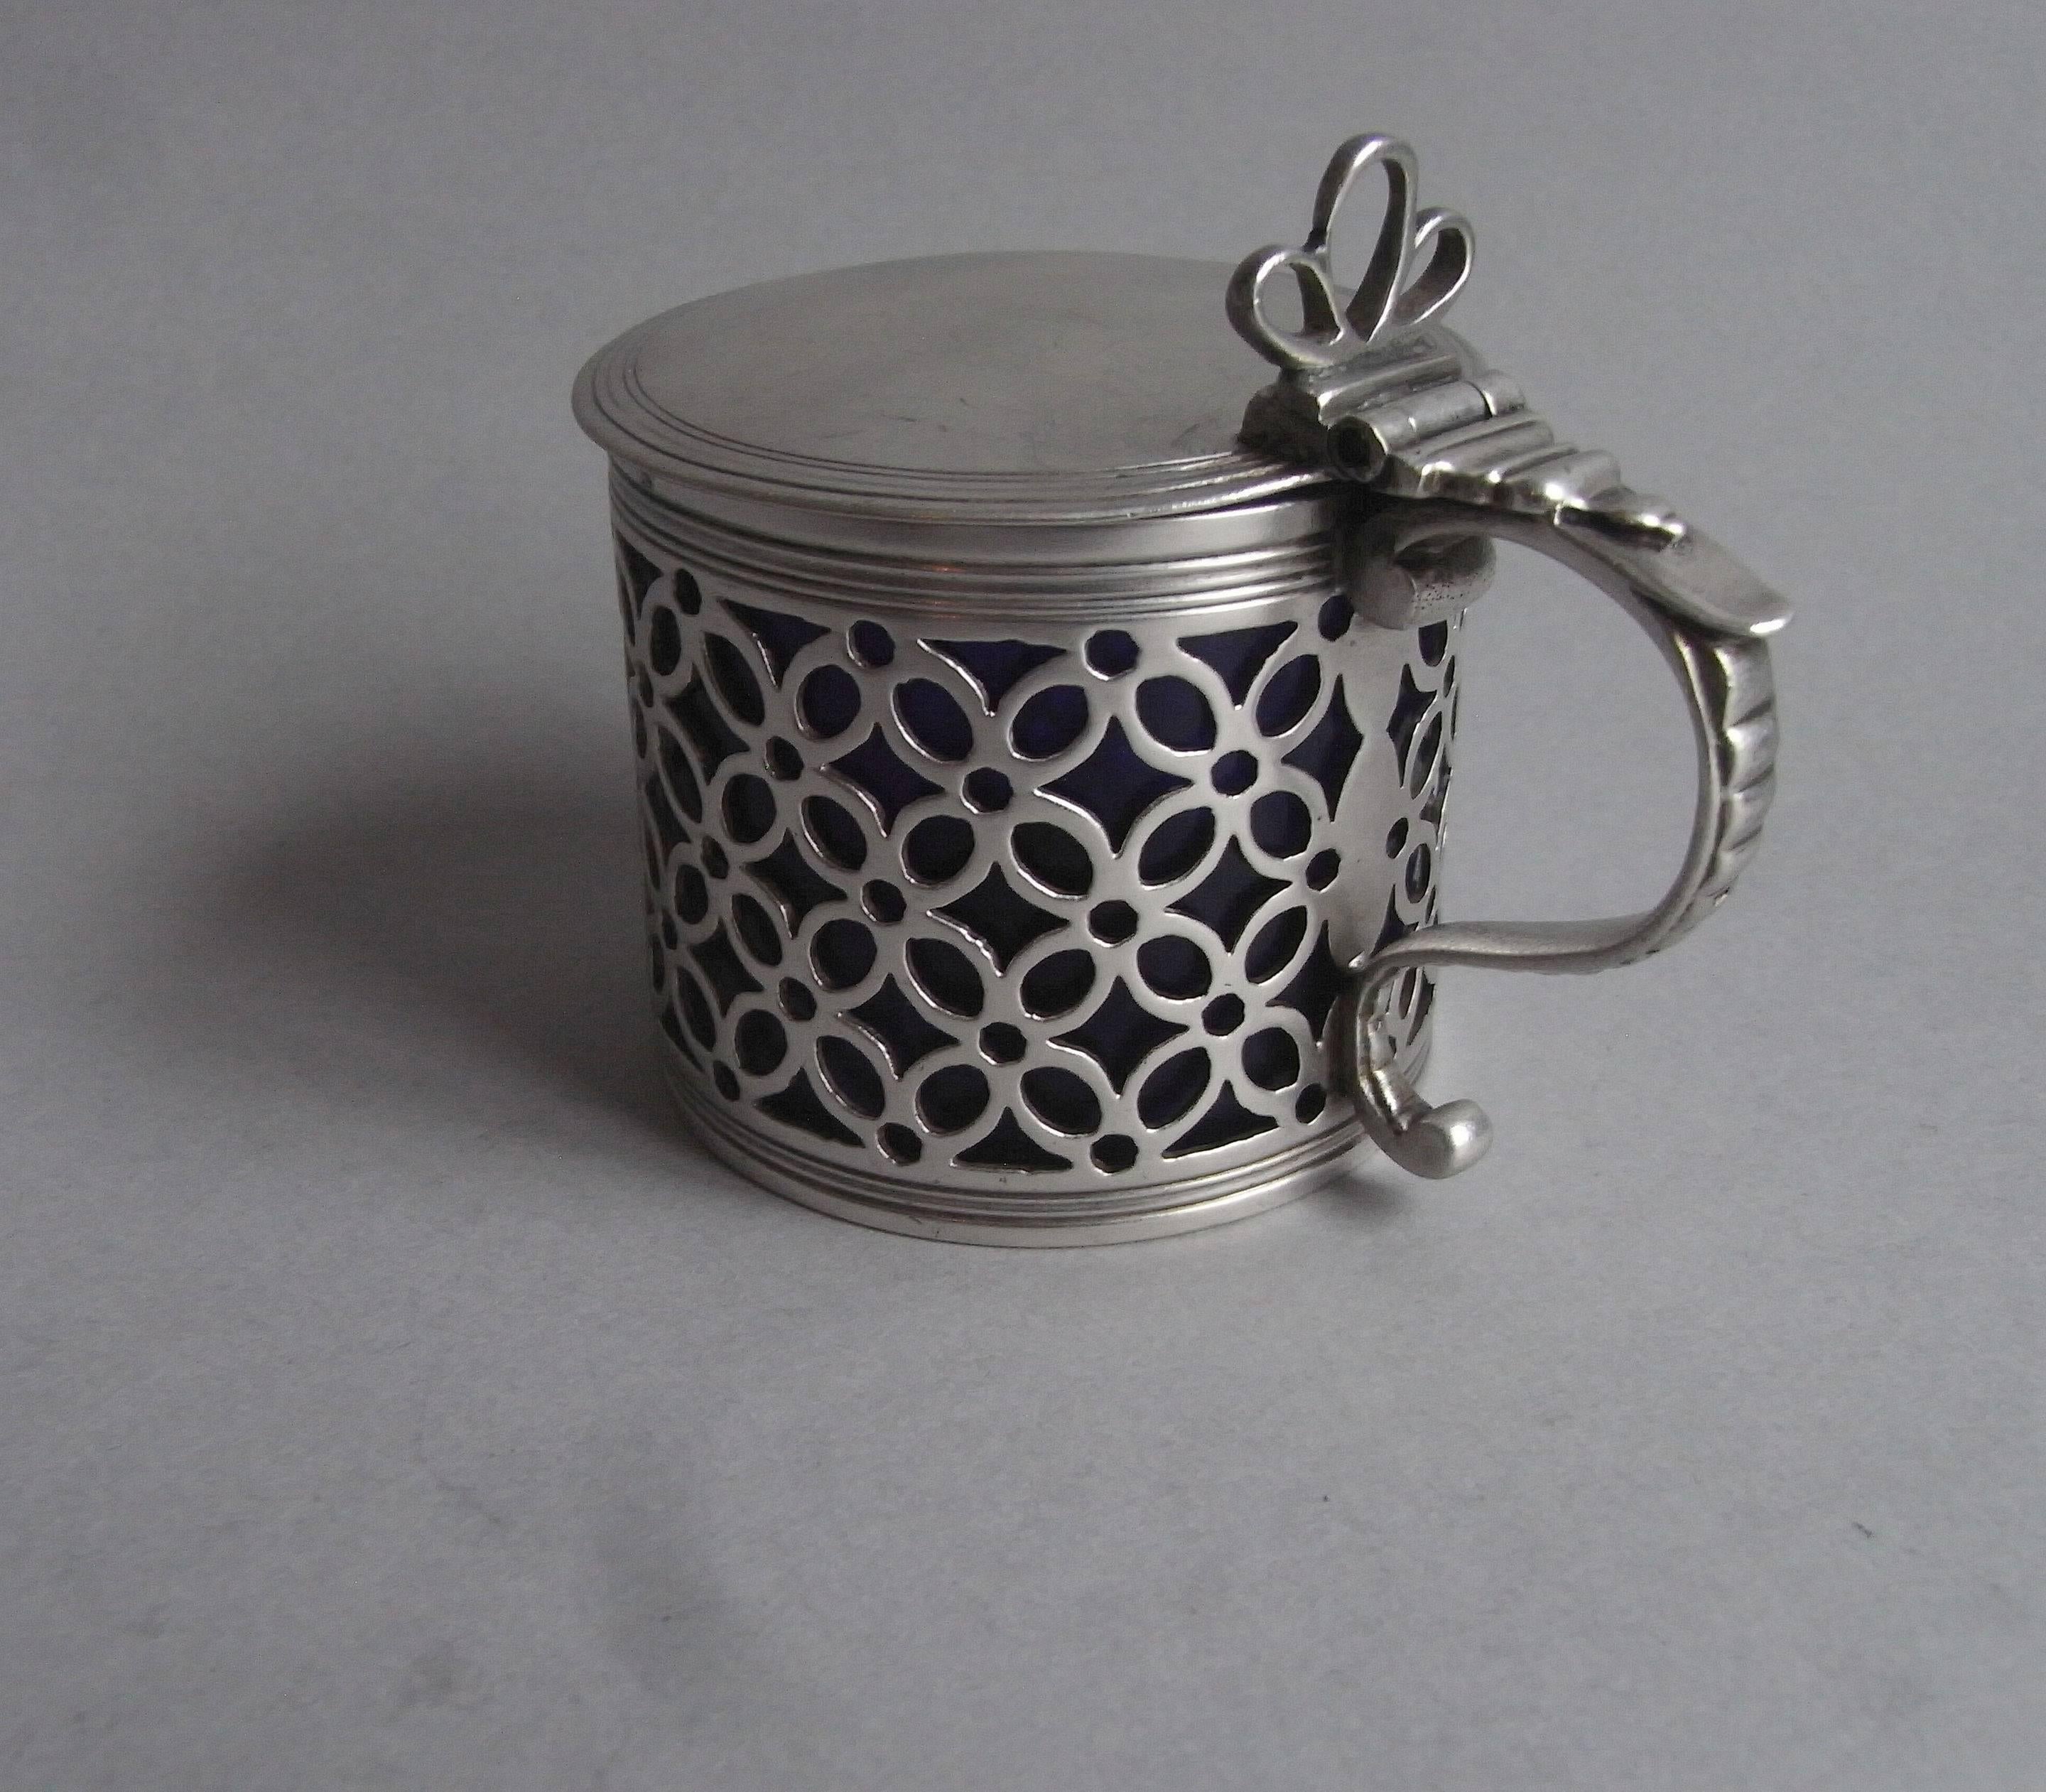 The mustard pot is modelled in the drum form and the sides are pierced with quatrefoil designs and roundels. The cover displays a reeded edge and the scroll handle is decorated with ribbing. This piece has a tri-furcated pierced thumb piece and a